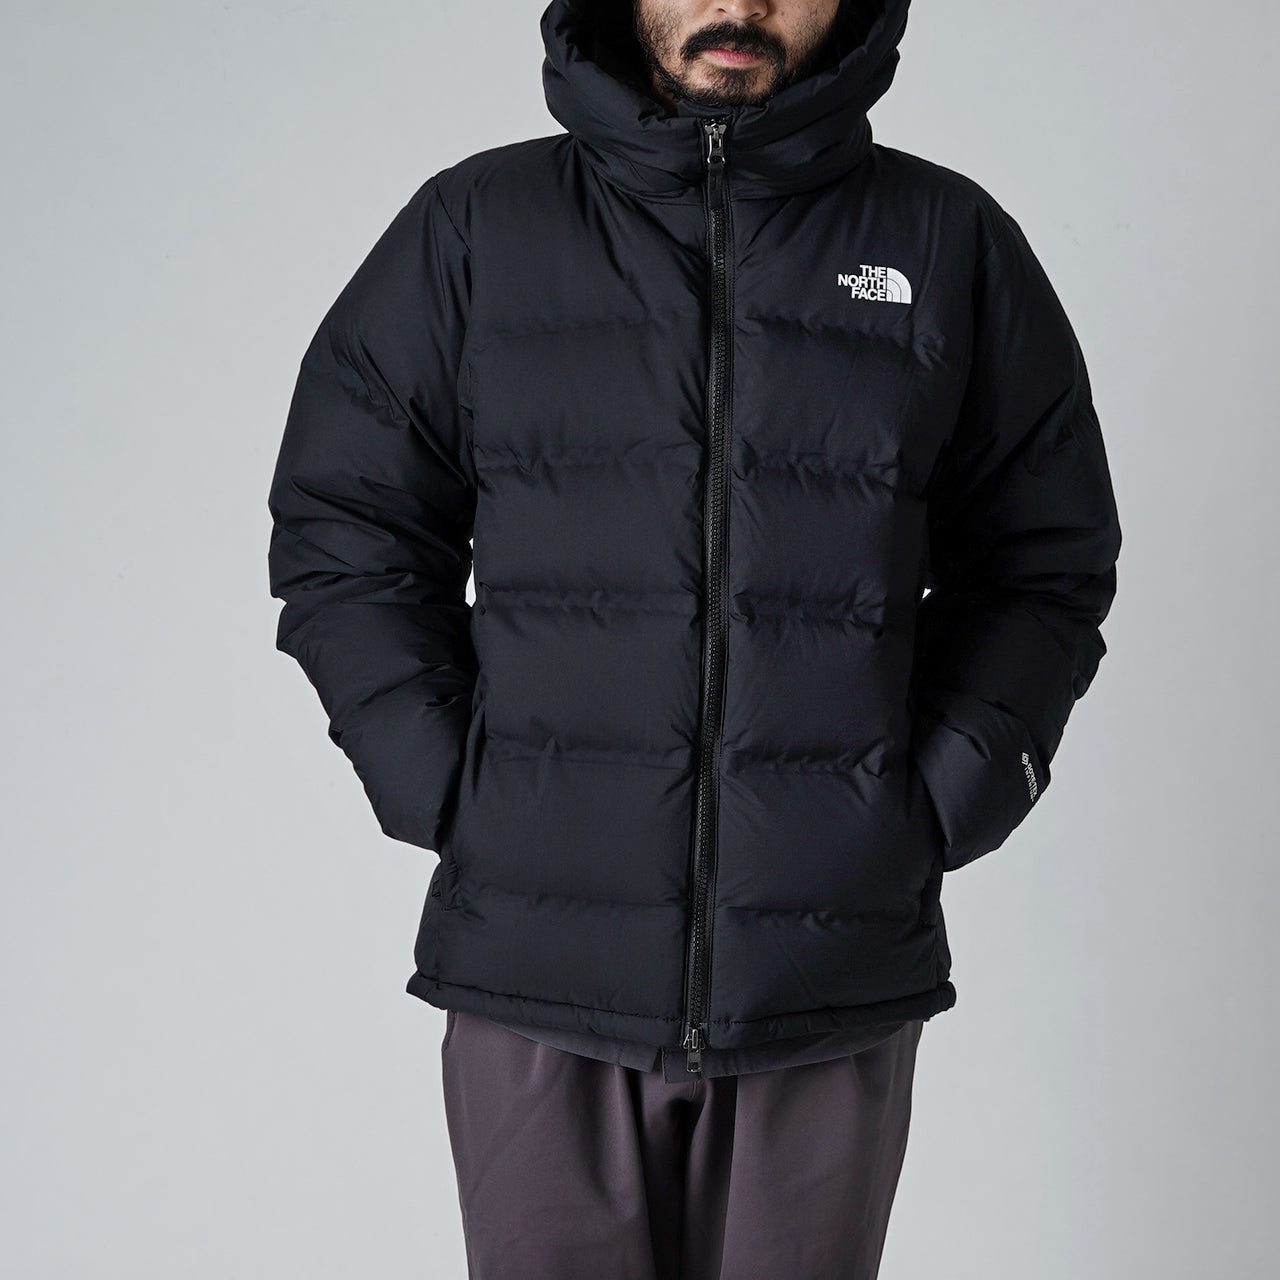 THE NORTH FACE Belayer Parka